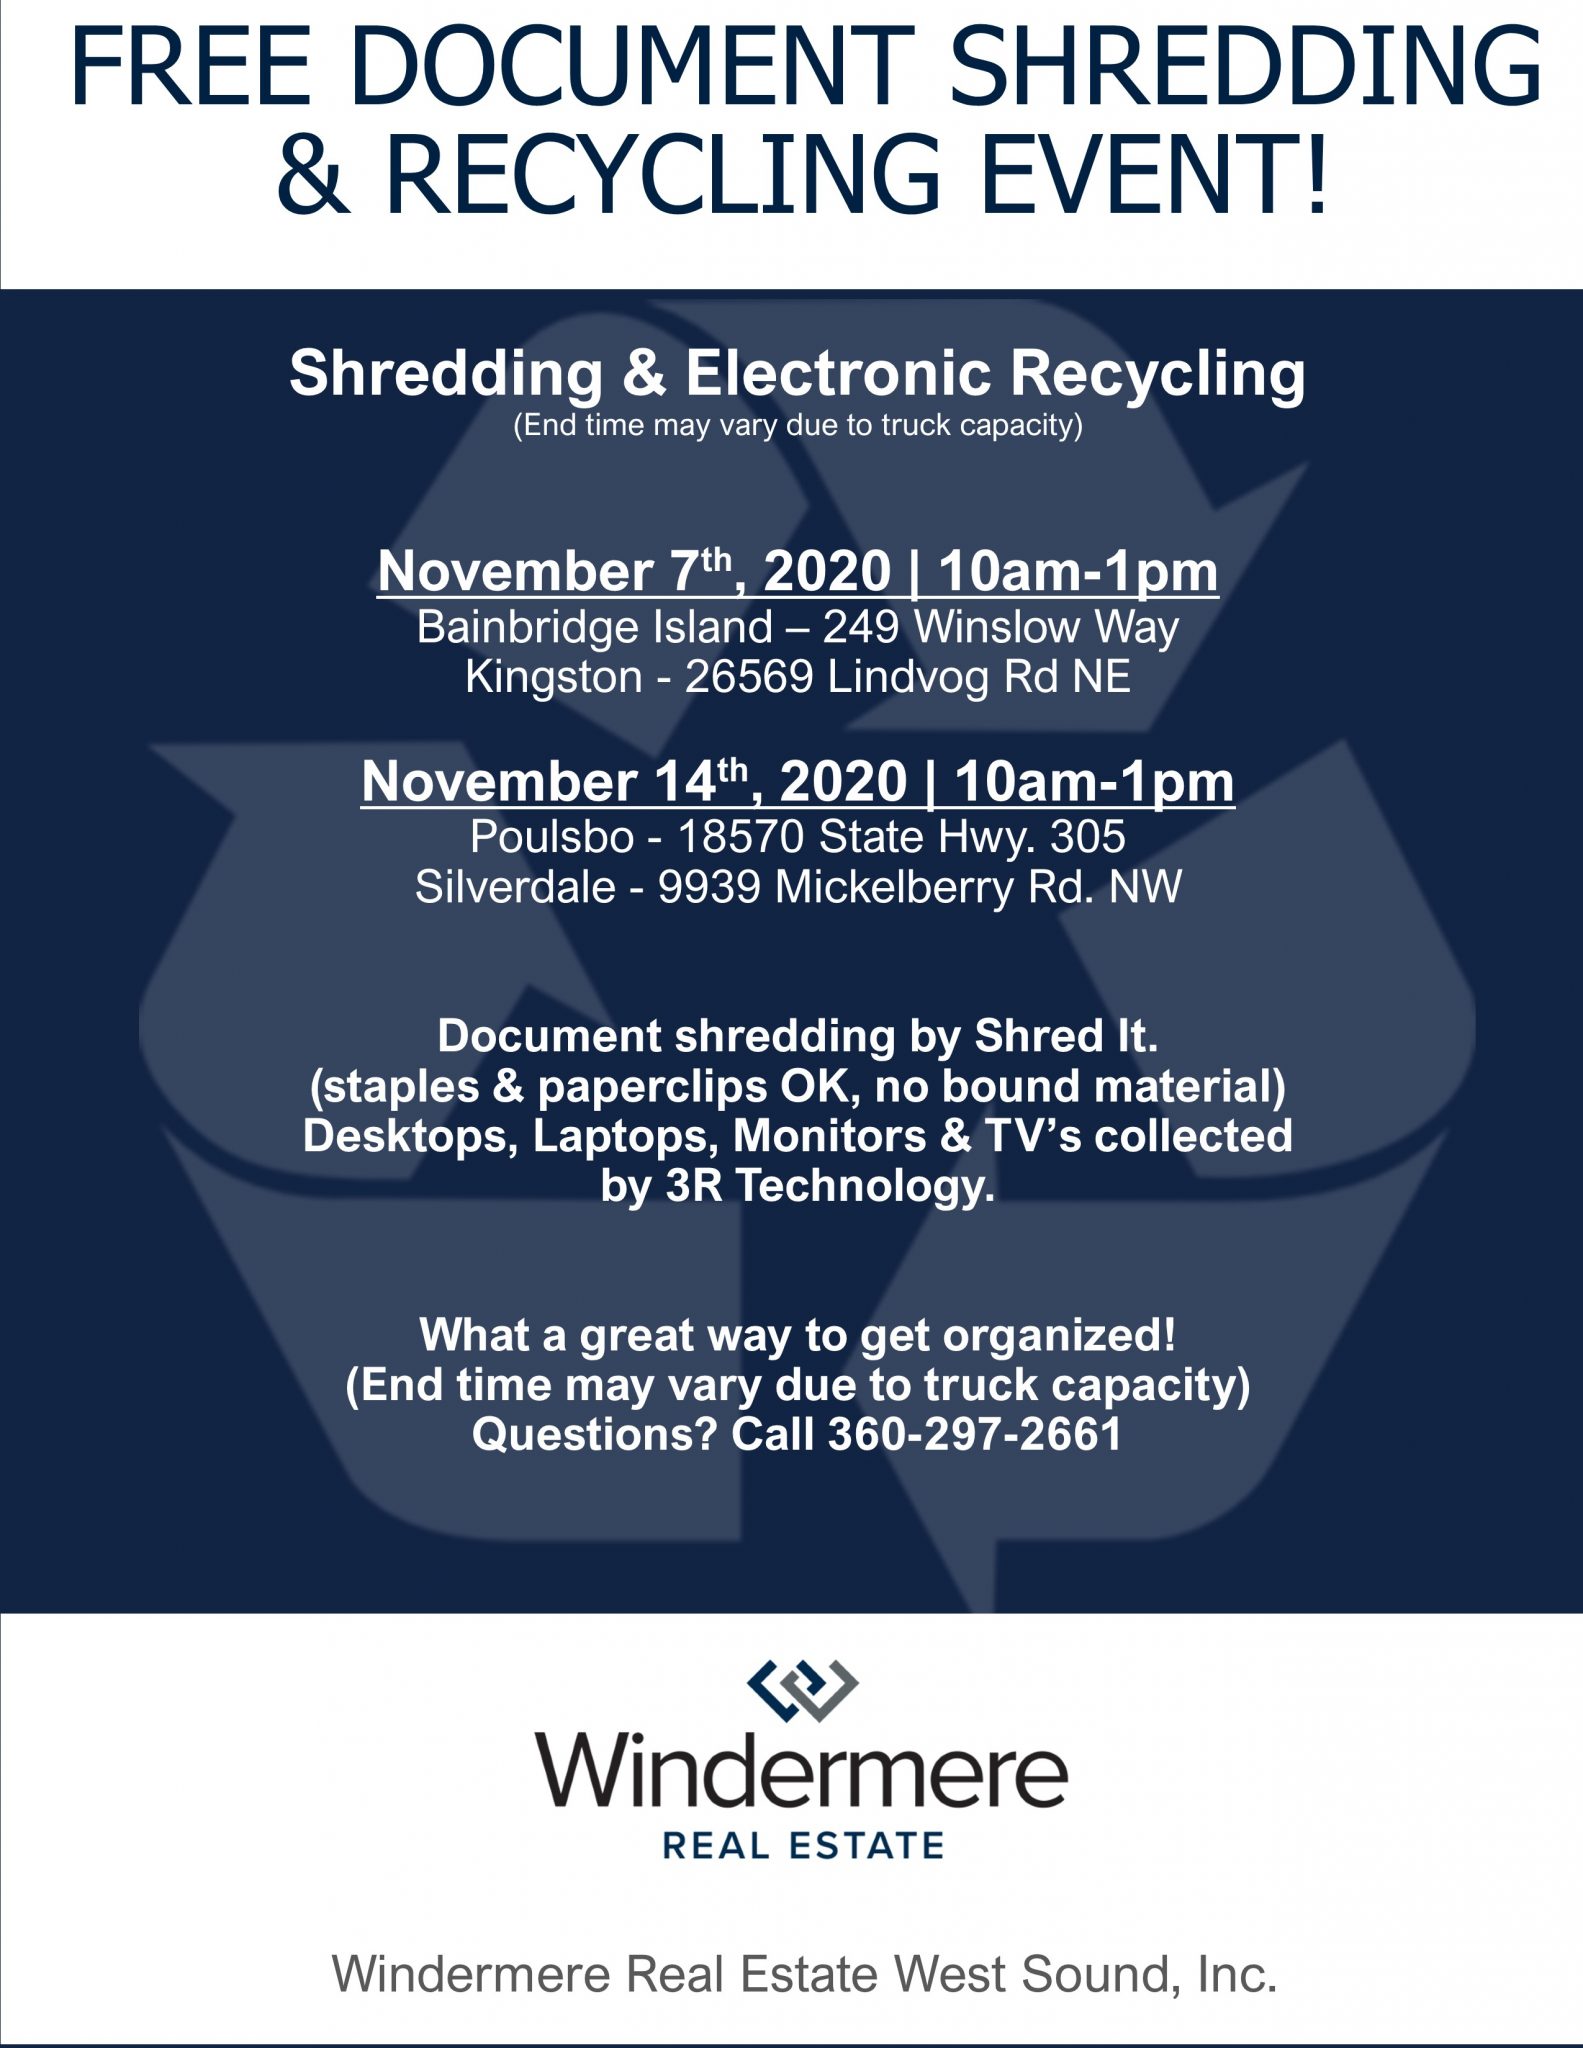 Shred Fest & ECycling Event Windermere Kingston